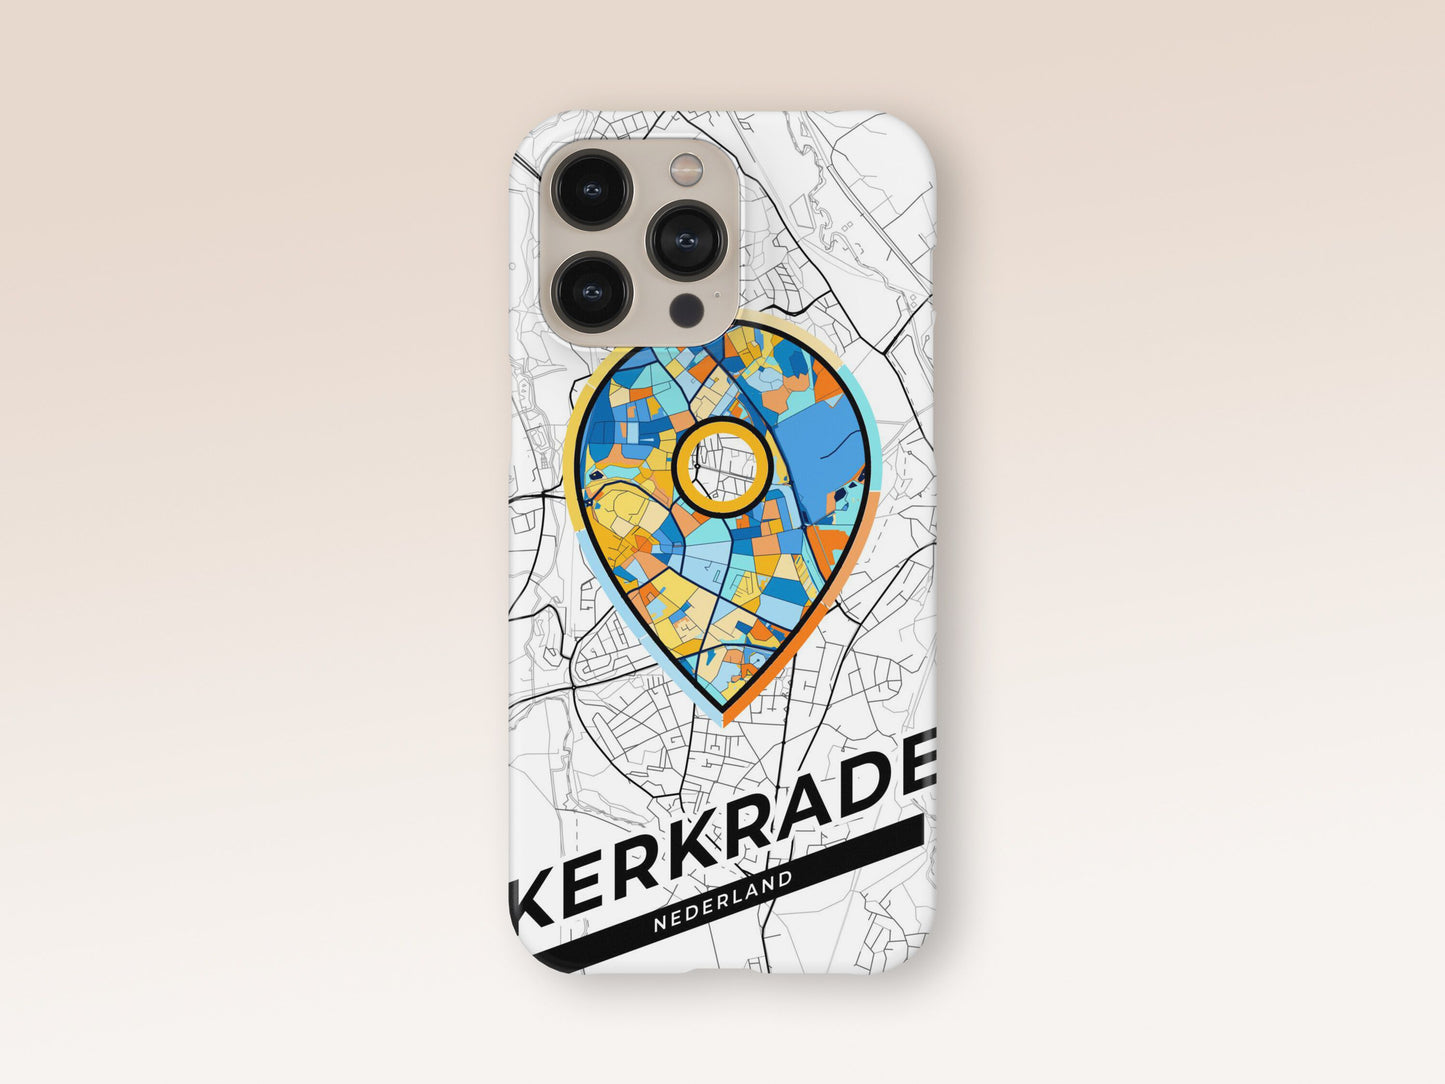 Kerkrade Netherlands slim phone case with colorful icon. Birthday, wedding or housewarming gift. Couple match cases. 1